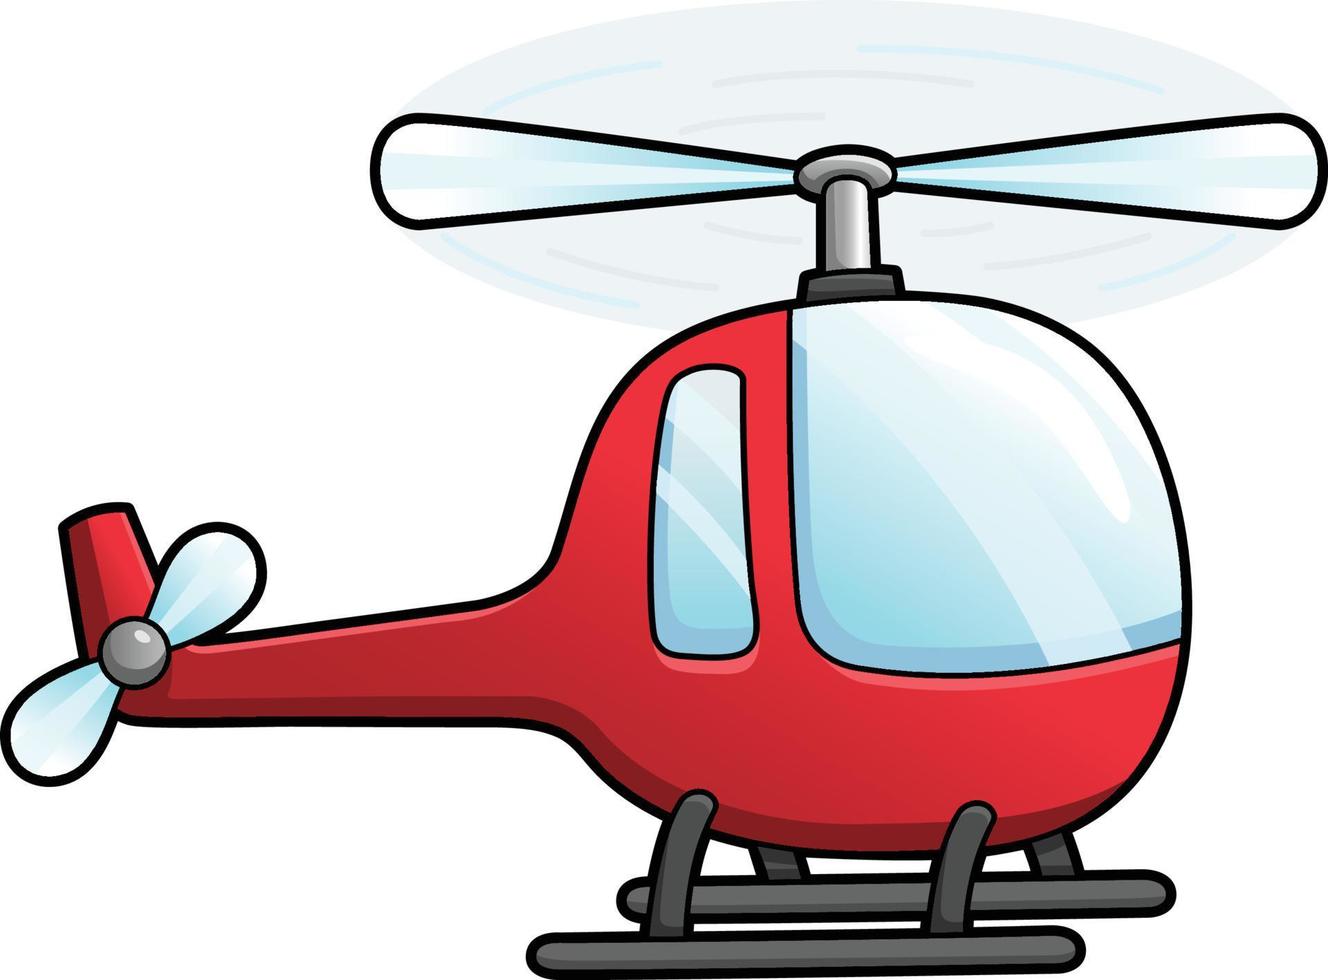 Helicopter Cartoon Clipart Colored Illustration 20 Vector Art ...